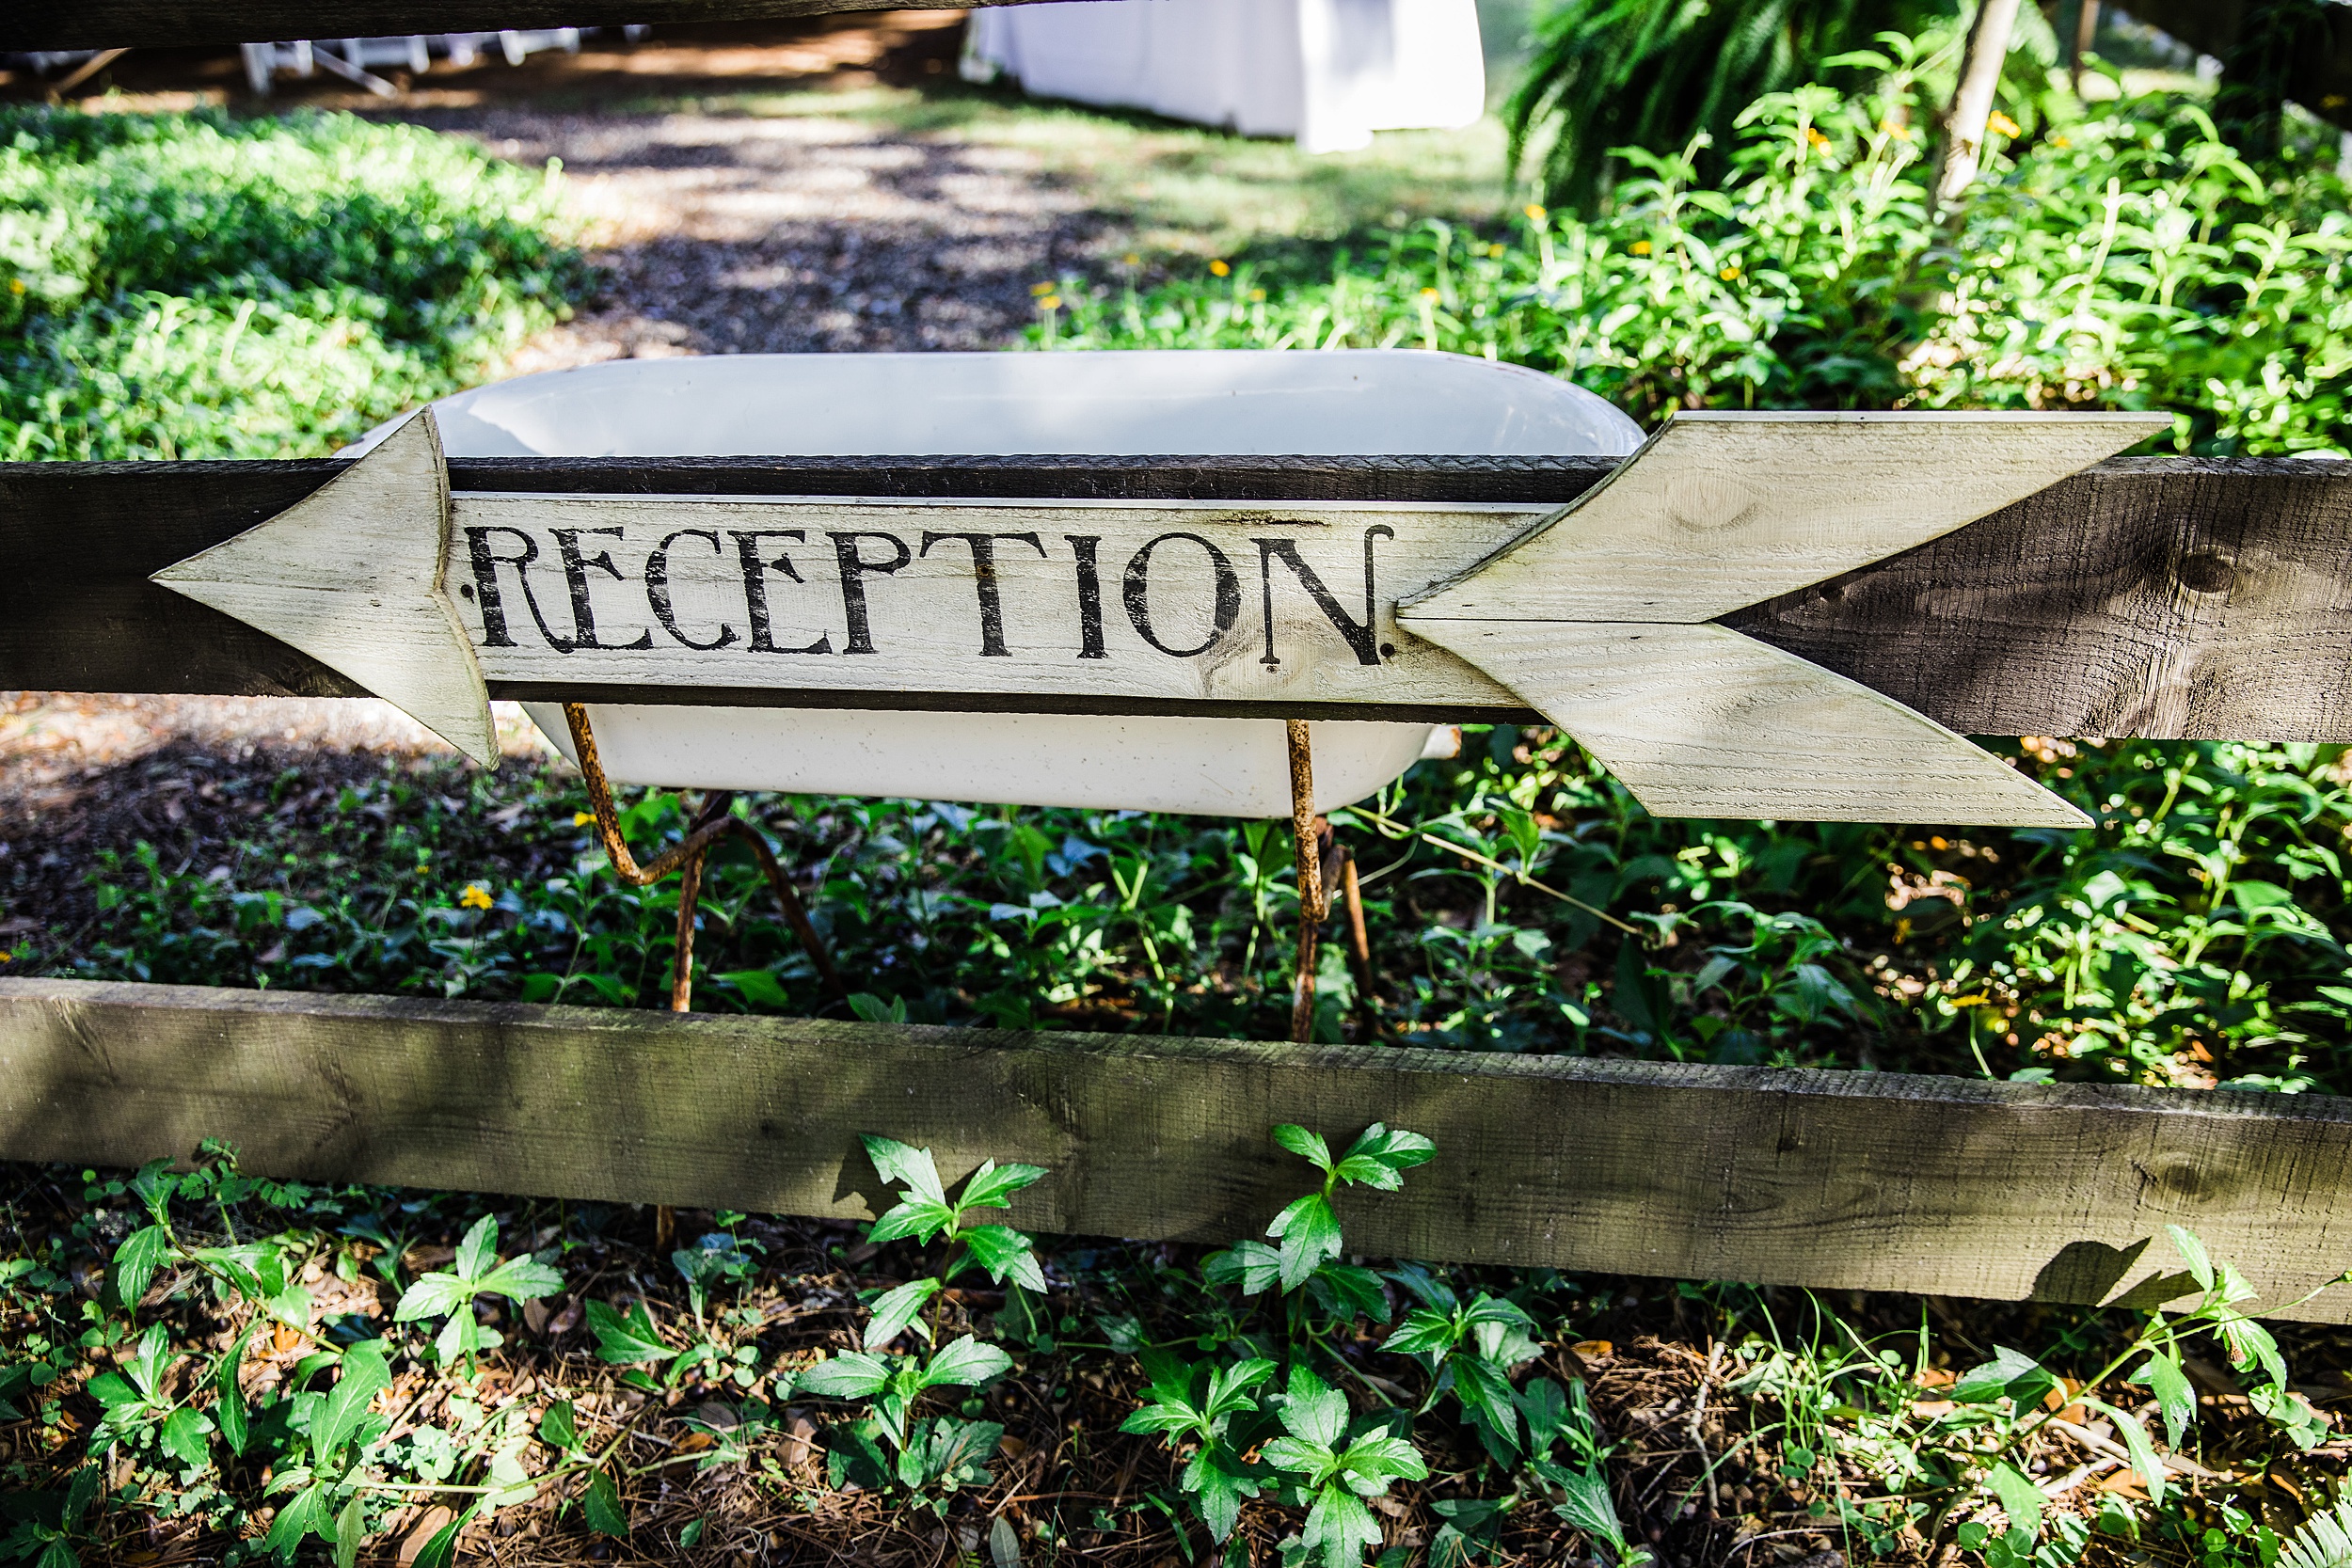 Details of a wedding reception sign built into a wooden fence